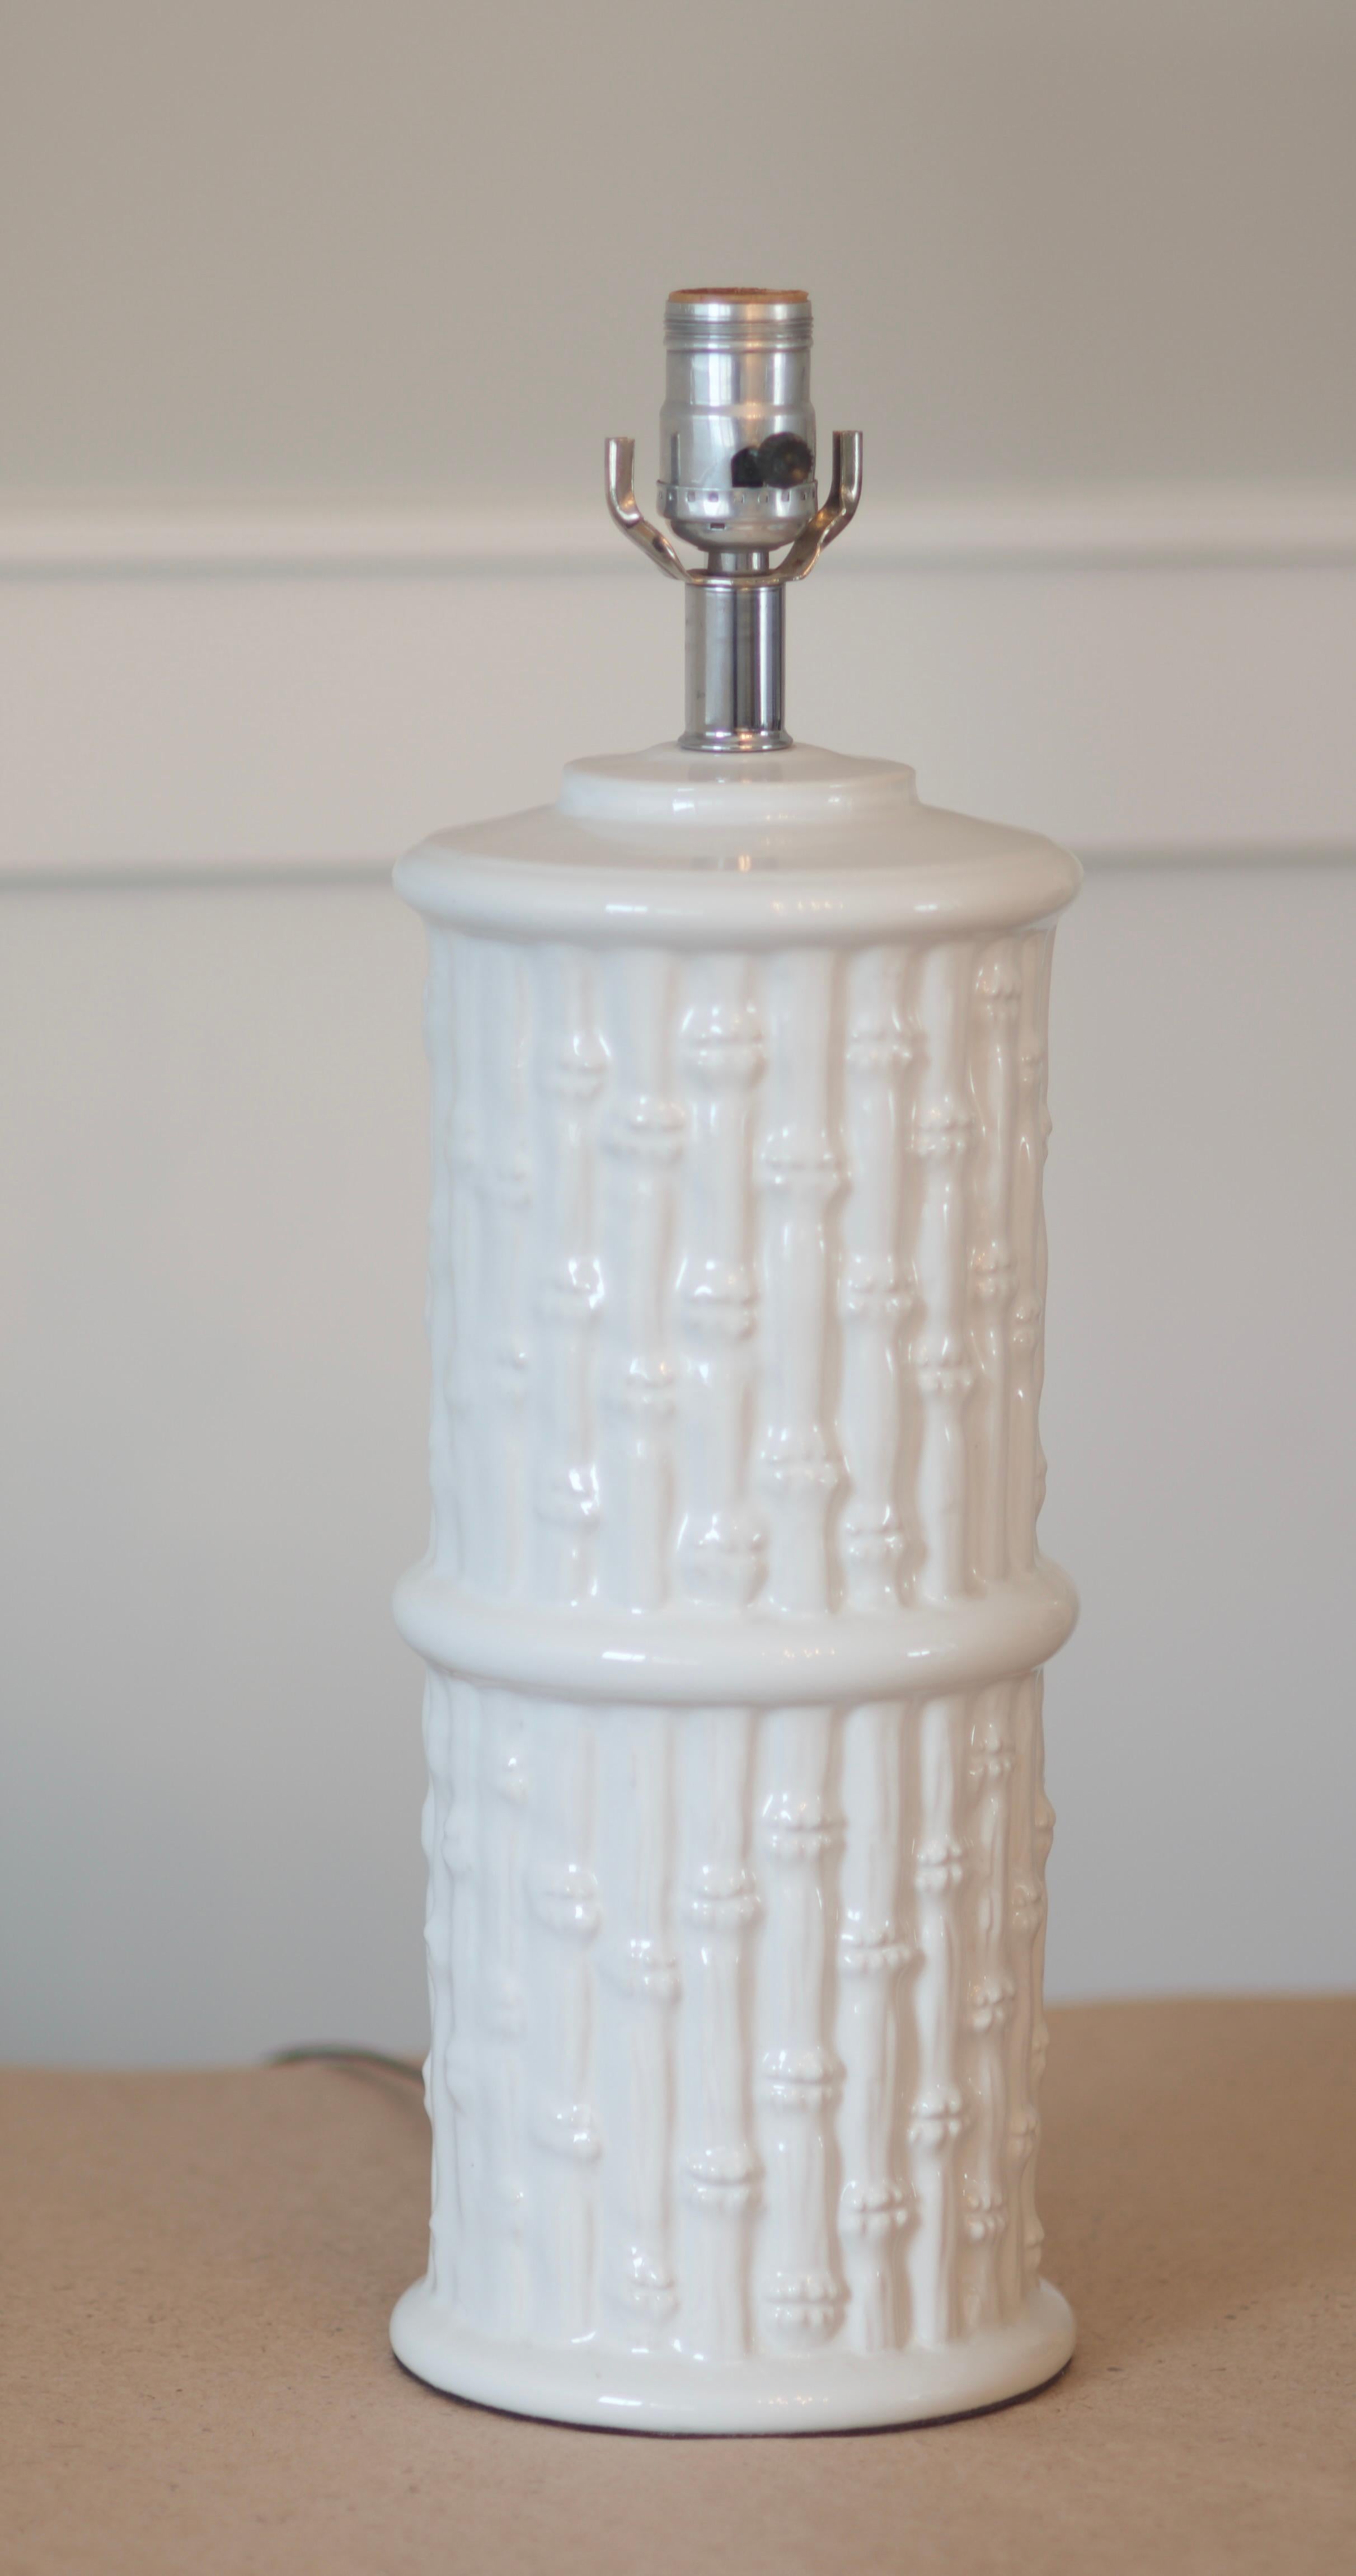 American Vintage 1960s Mid-Century Modern White Ceramic Faux Bamboo Table Lamp For Sale